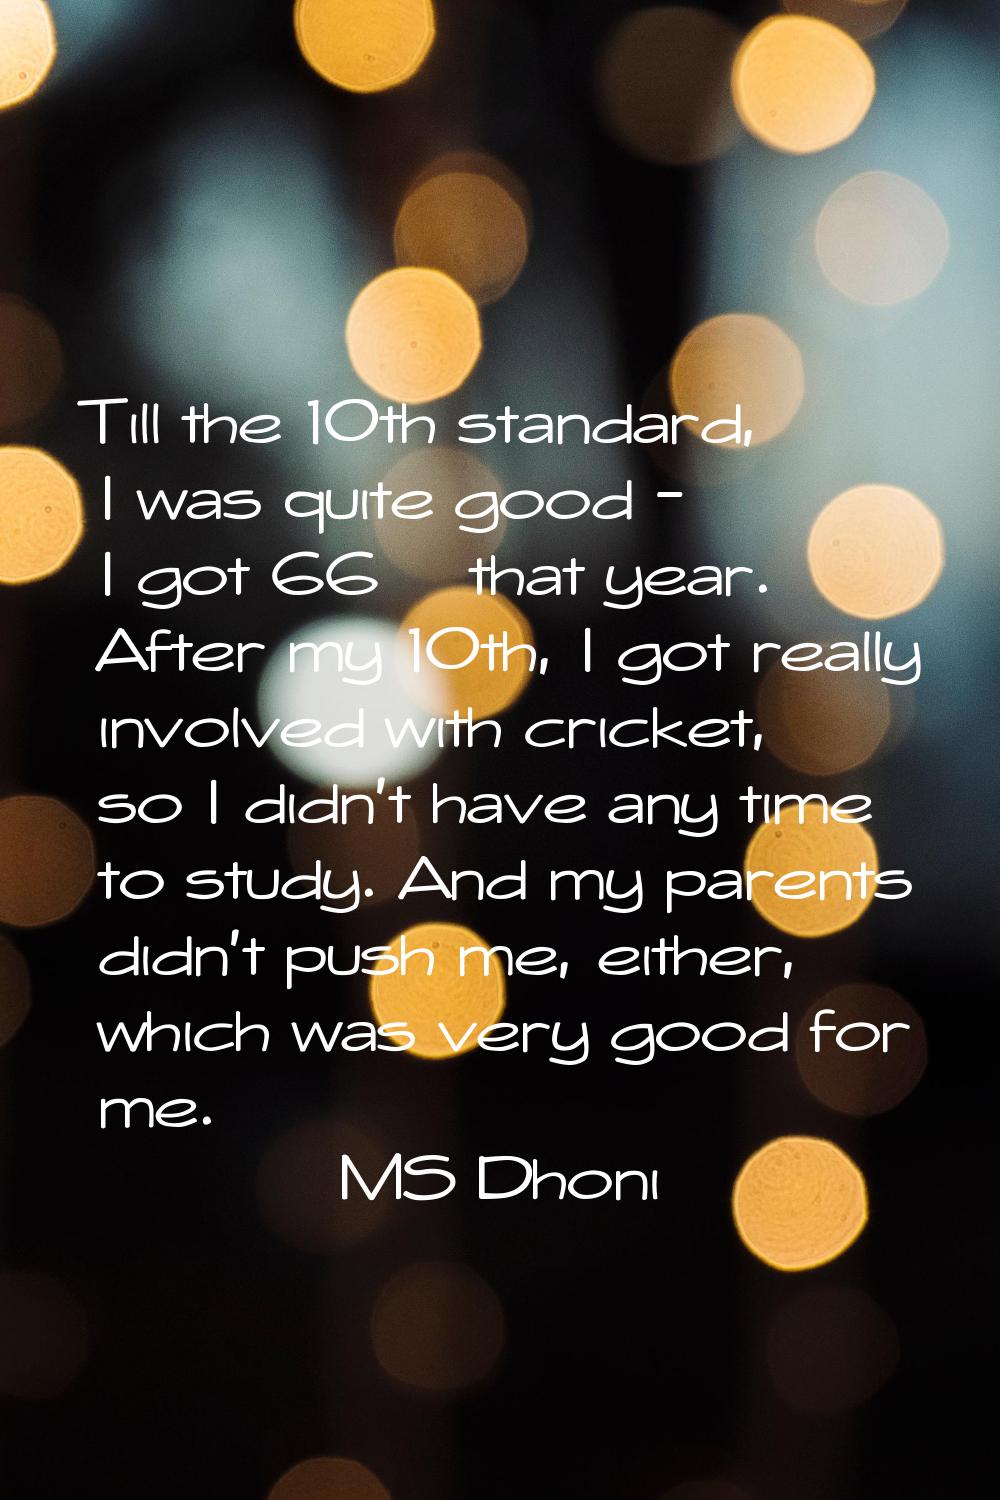 Till the 10th standard, I was quite good - I got 66% that year. After my 10th, I got really involve